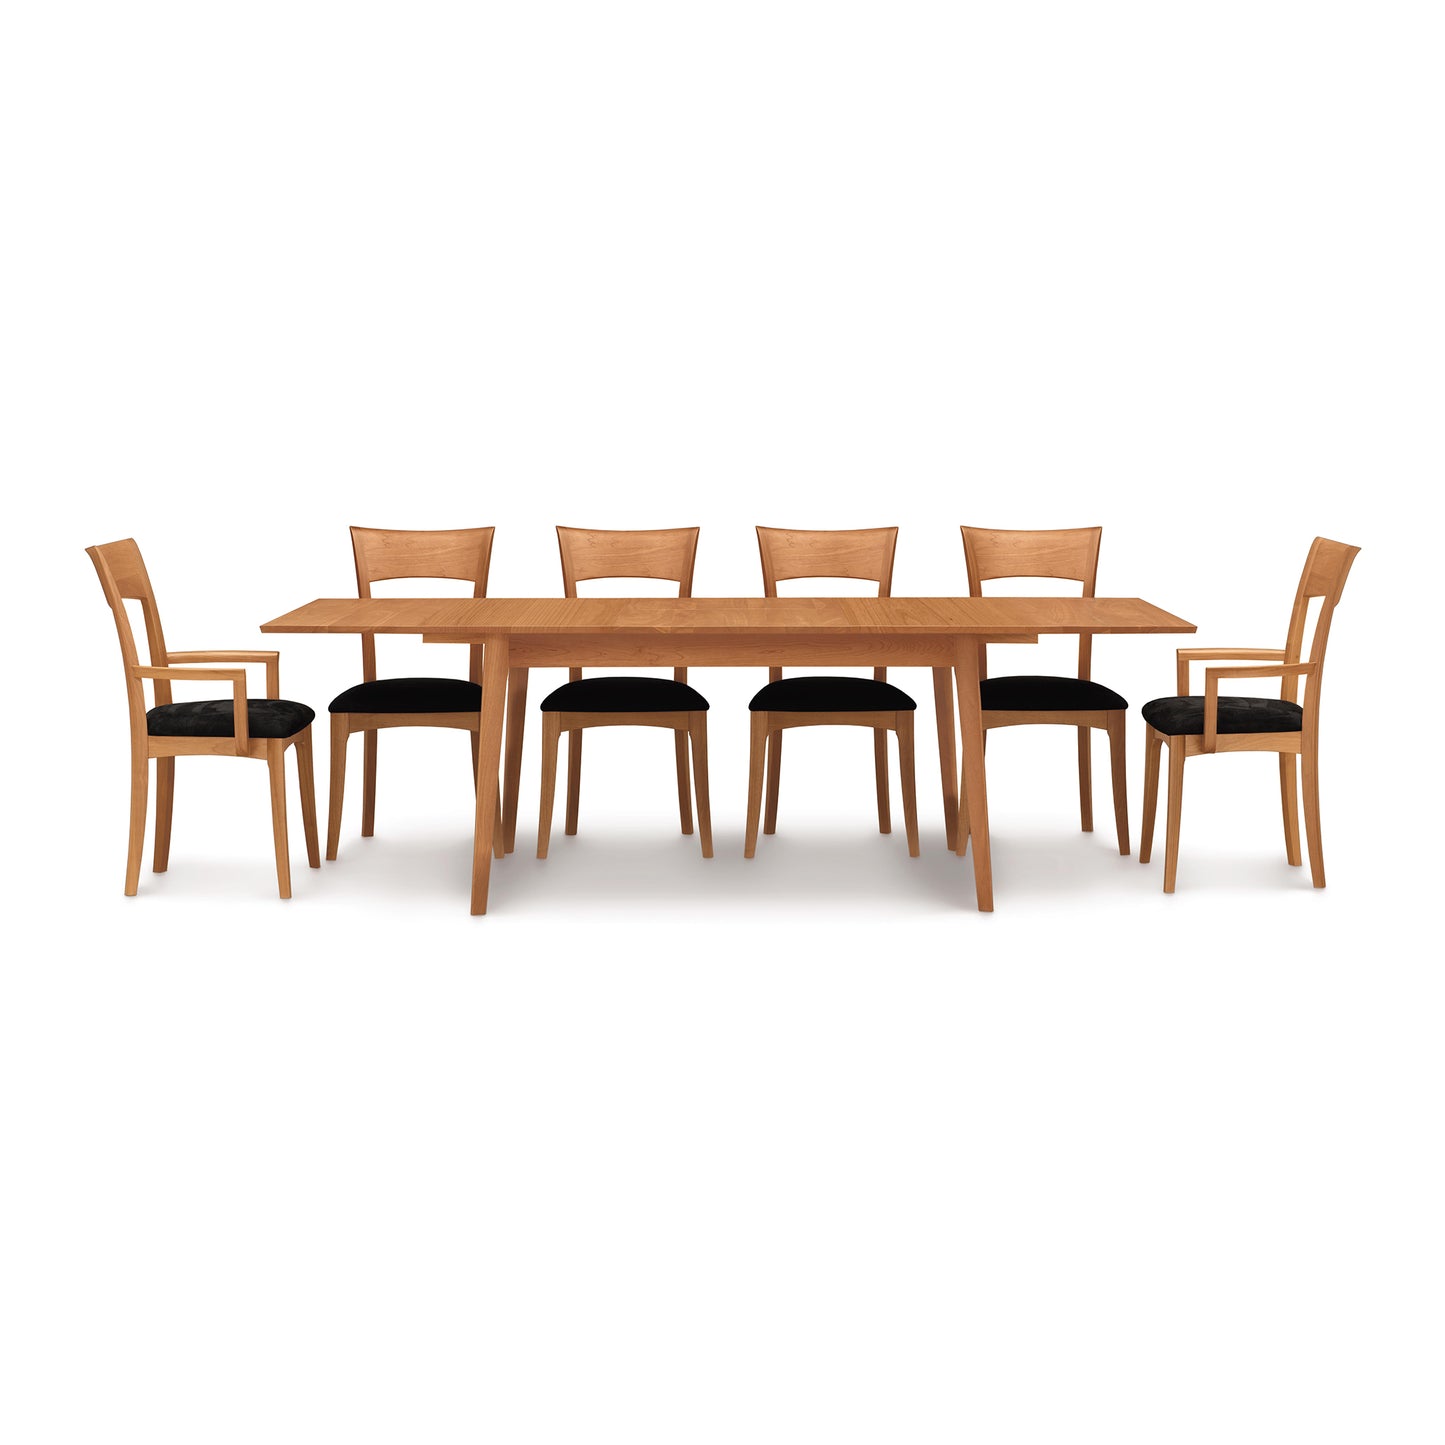 A Catalina Extension Table from Copeland Furniture, with six chairs.